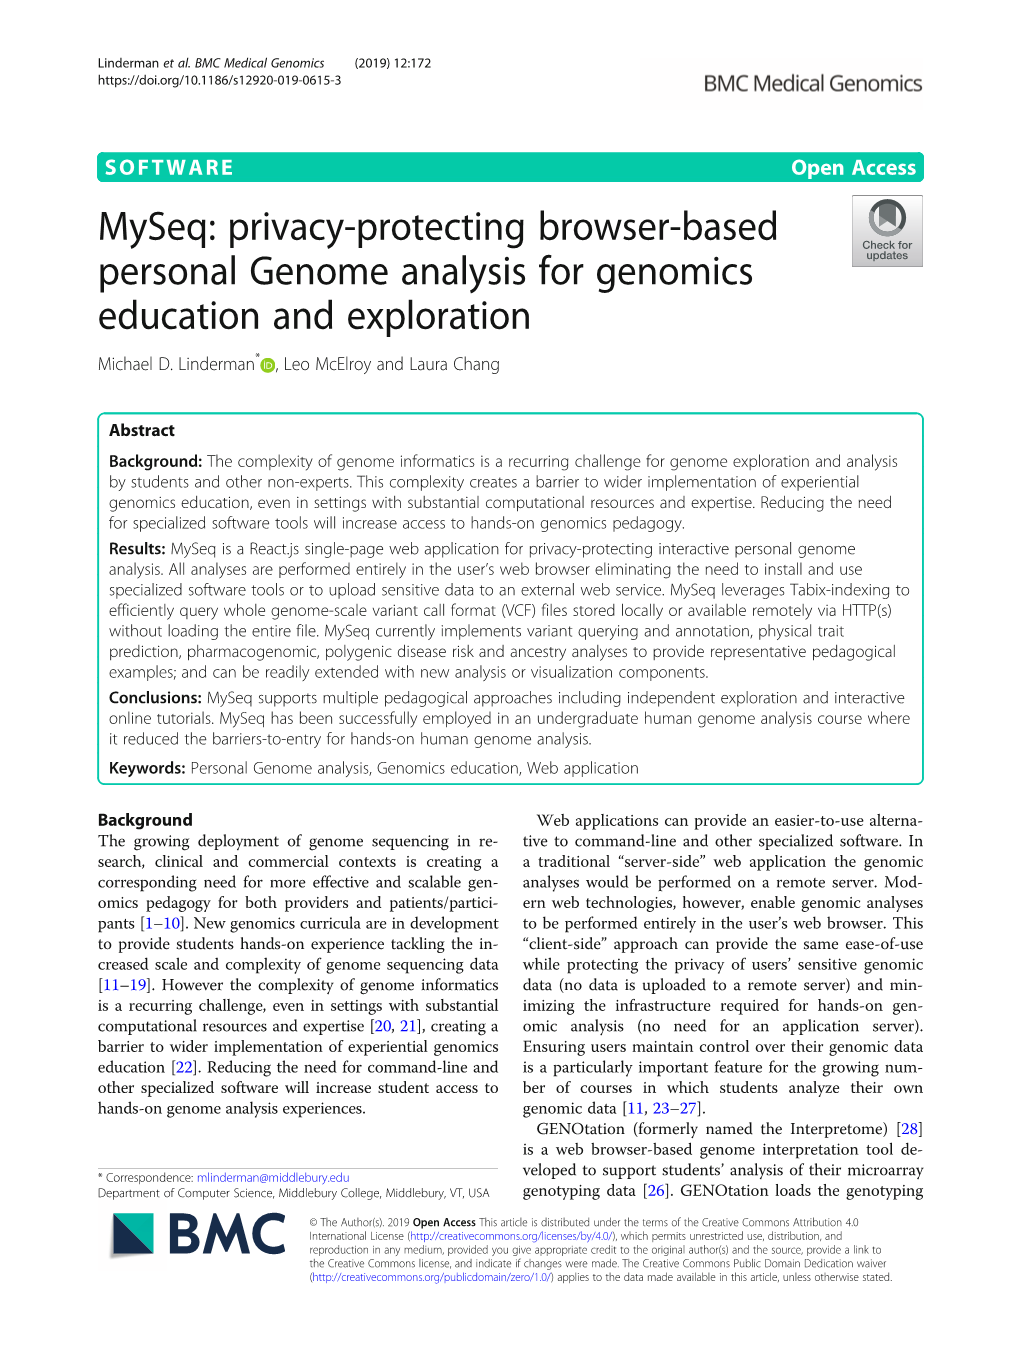 Privacy-Protecting Browser-Based Personal Genome Analysis for Genomics Education and Exploration Michael D